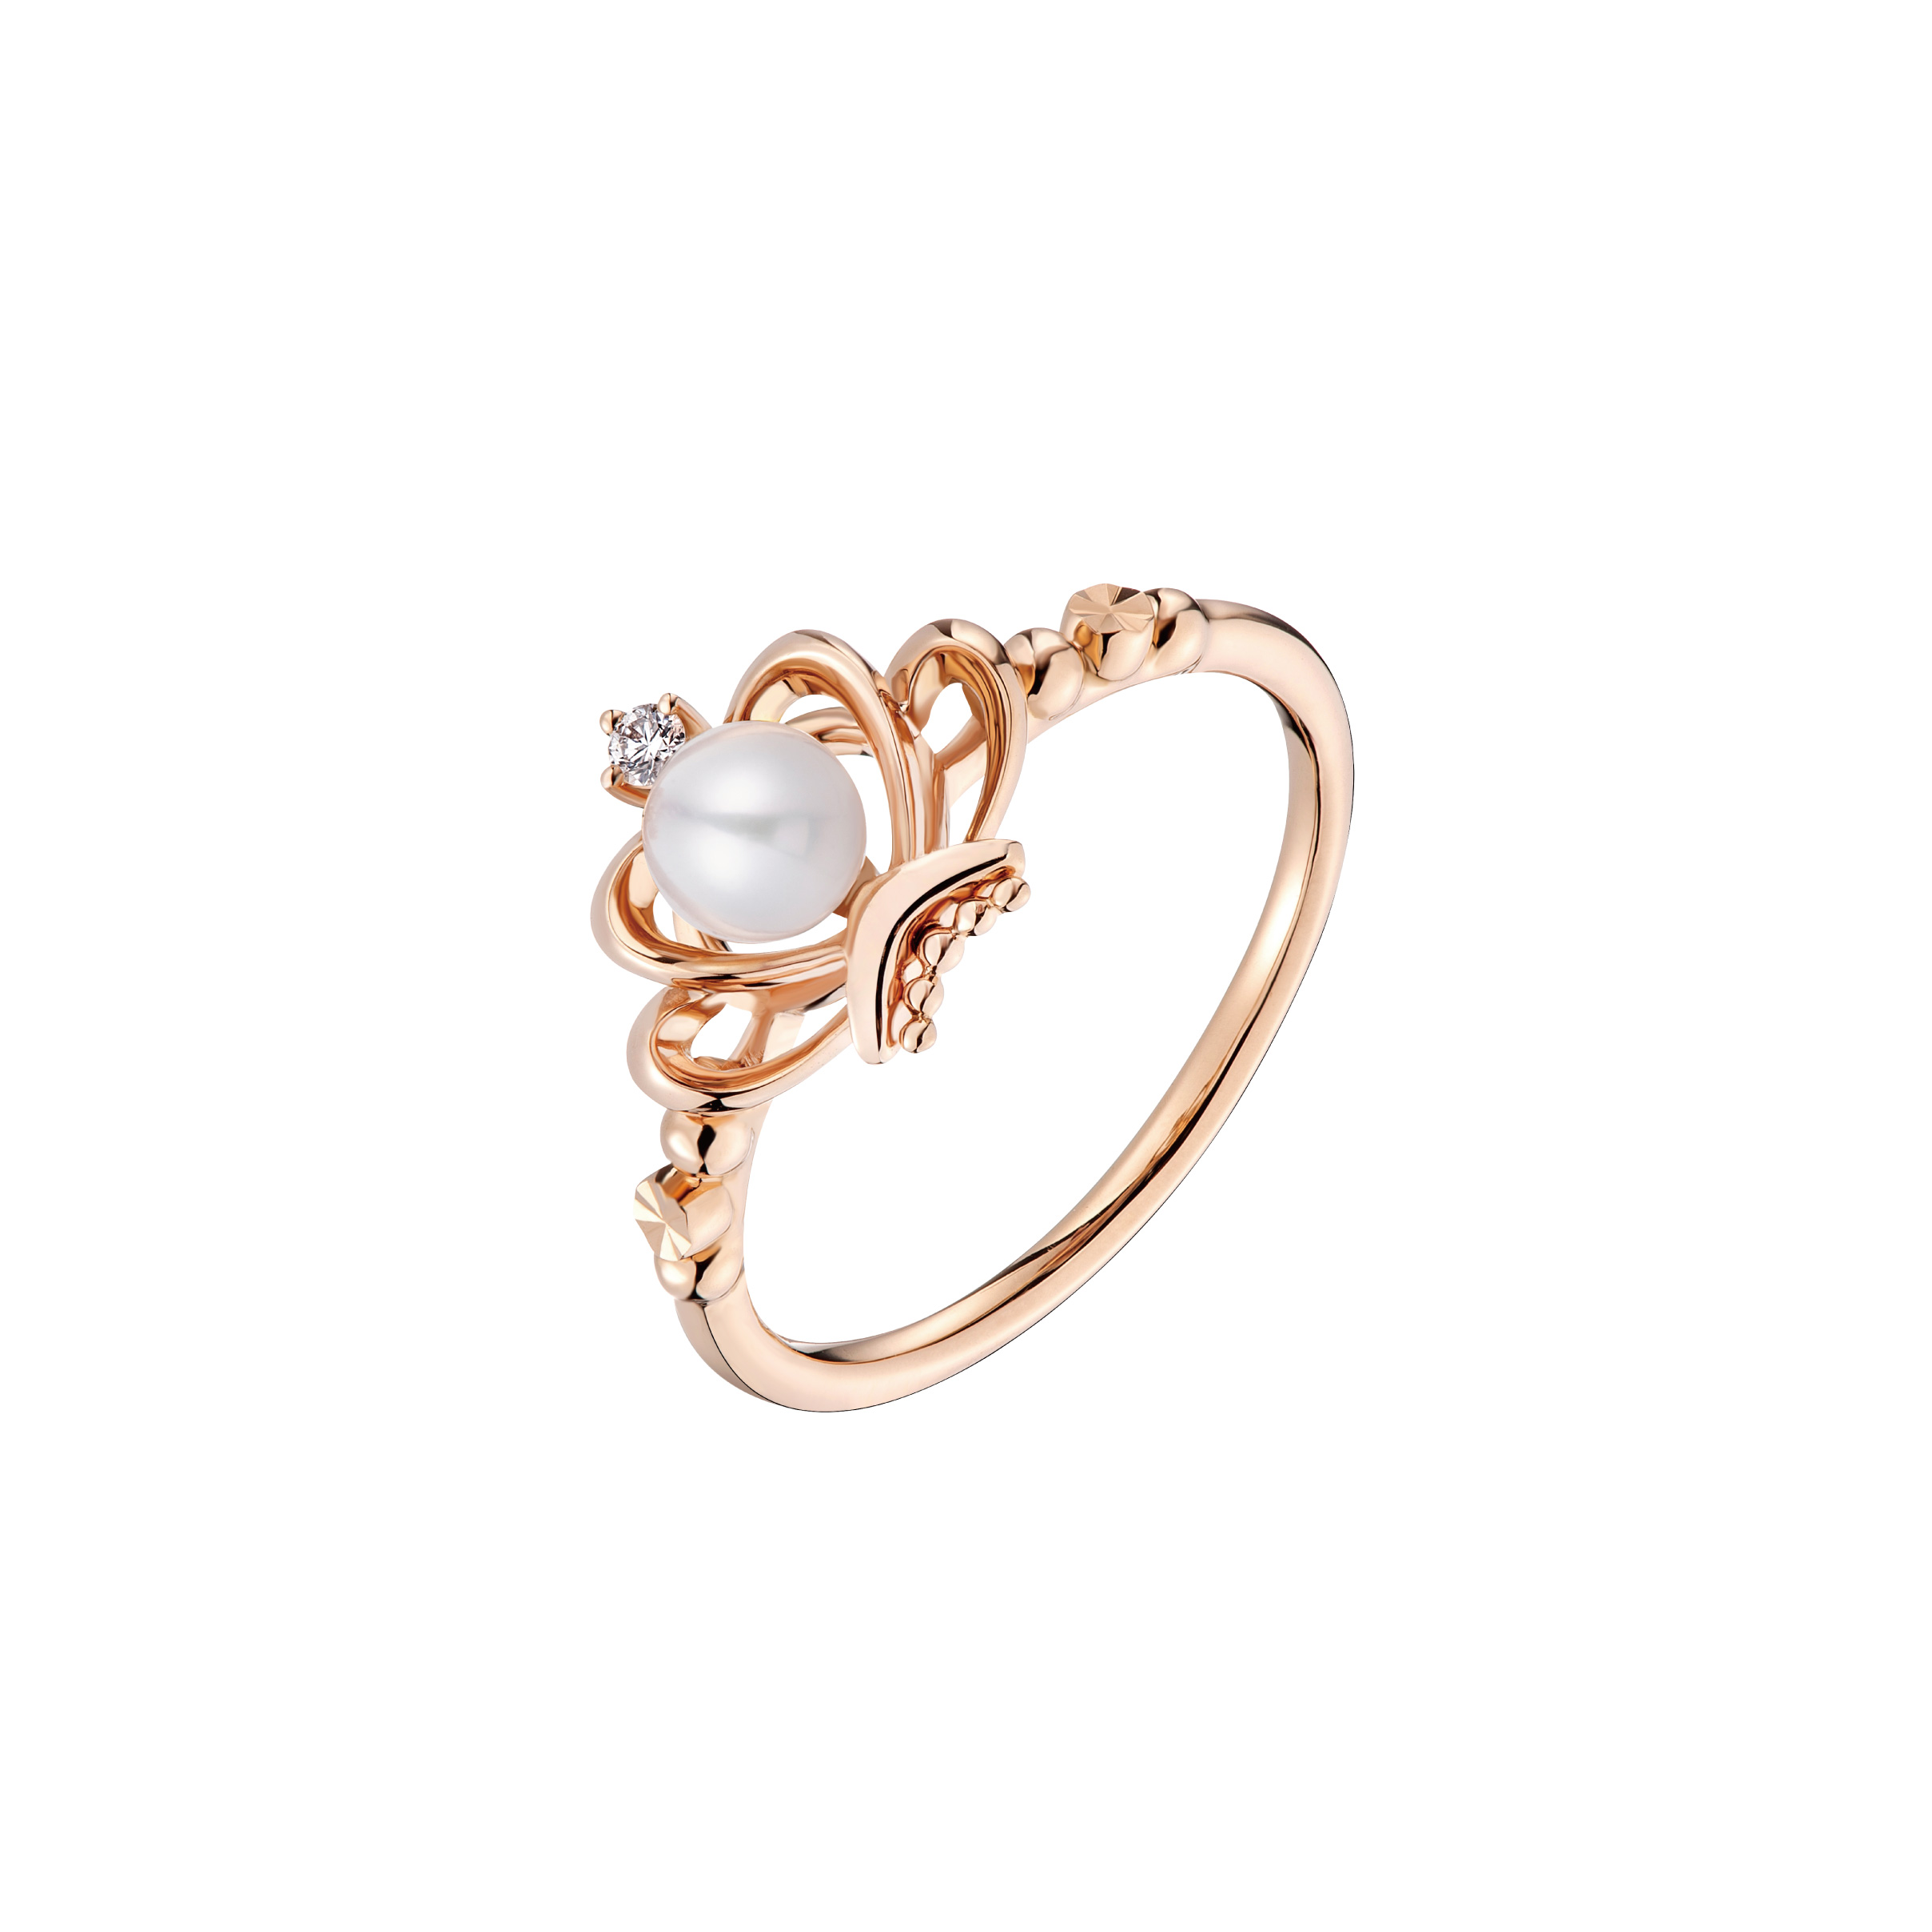 Dear Q "Shell" 18K Rose Gold Diamond Ring with Pearl